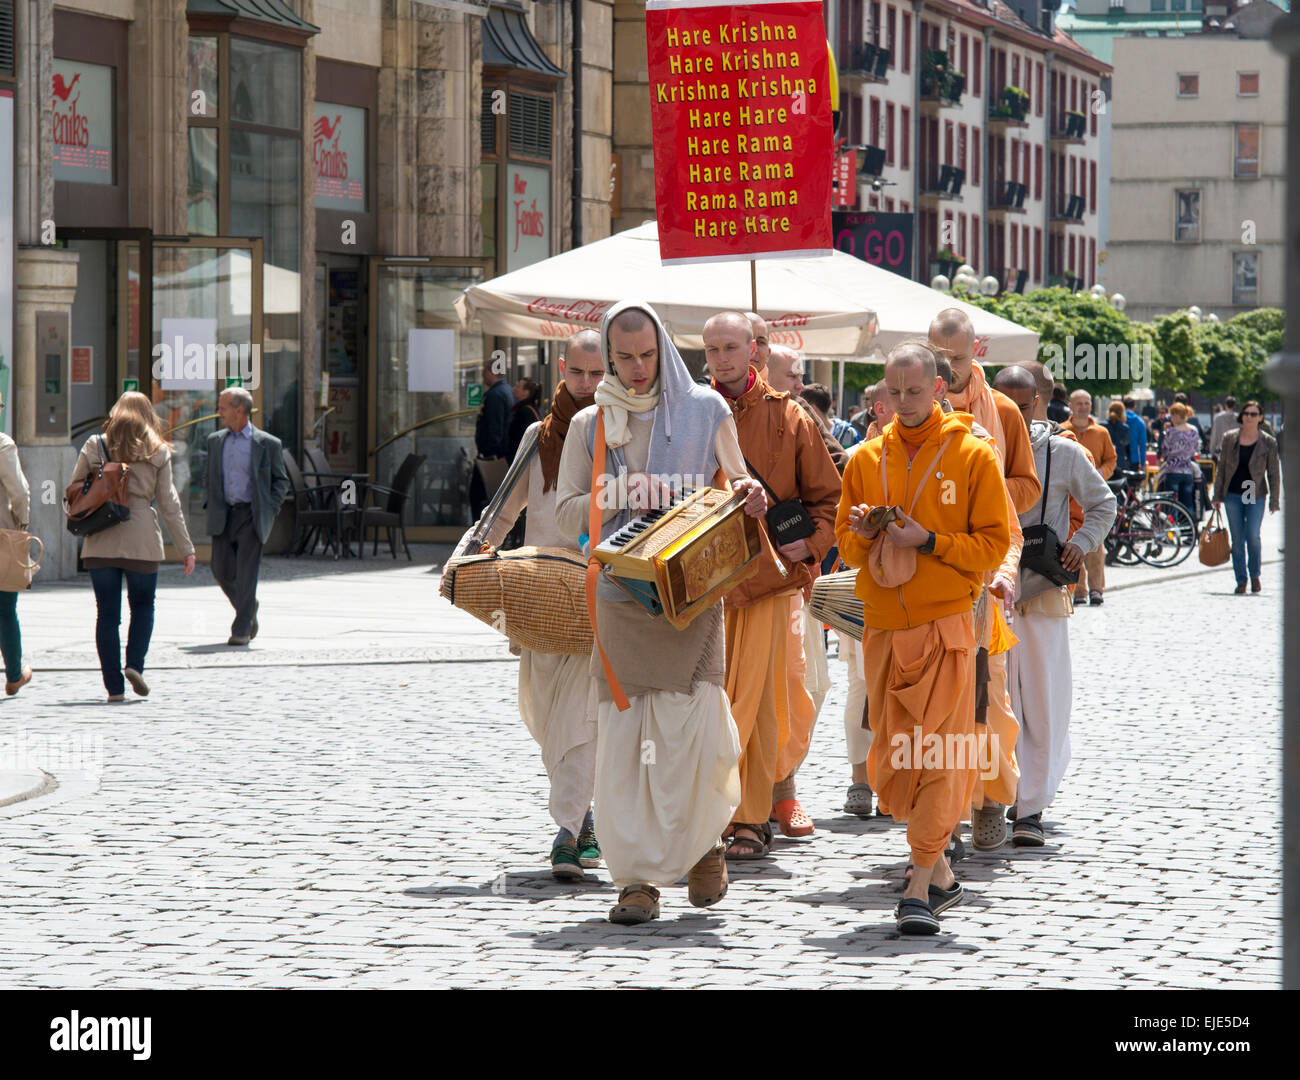 Wroclaw, Poland - 18 2014: members of Hare Krishna chanting and dancing May 18, 2014 on Wroclaw in Poland Stock Photo